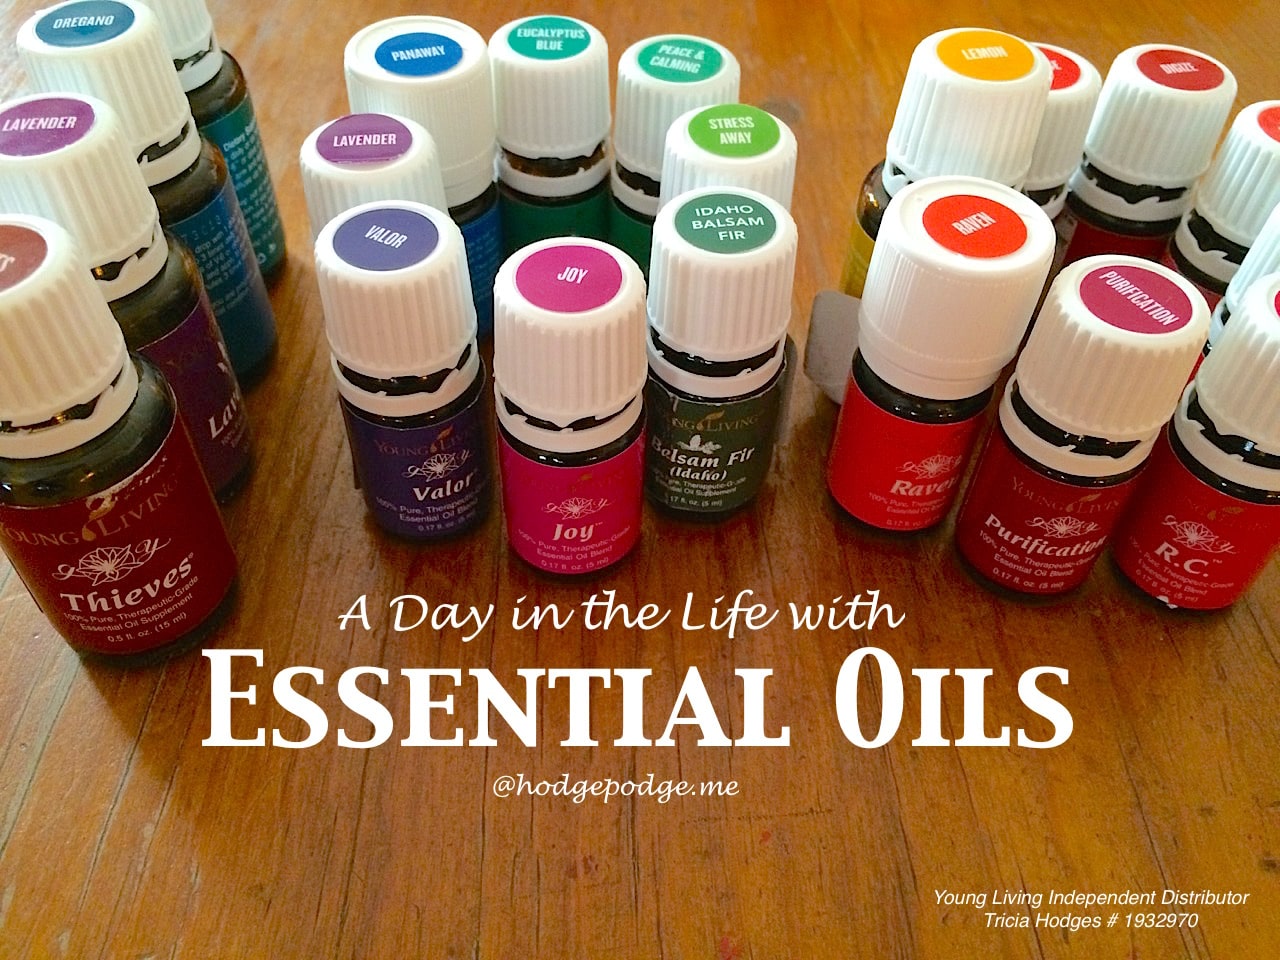 A Day in the Life with Essential Oils